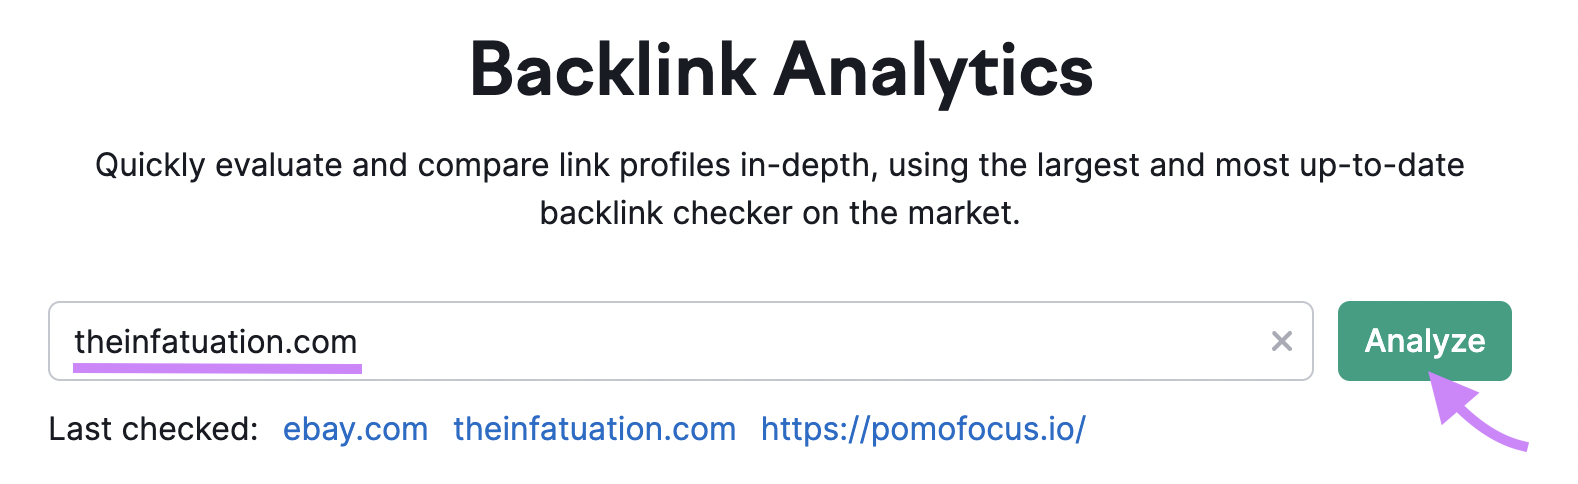 "theinfatuation.com" entered into Backlink Analytics search bar